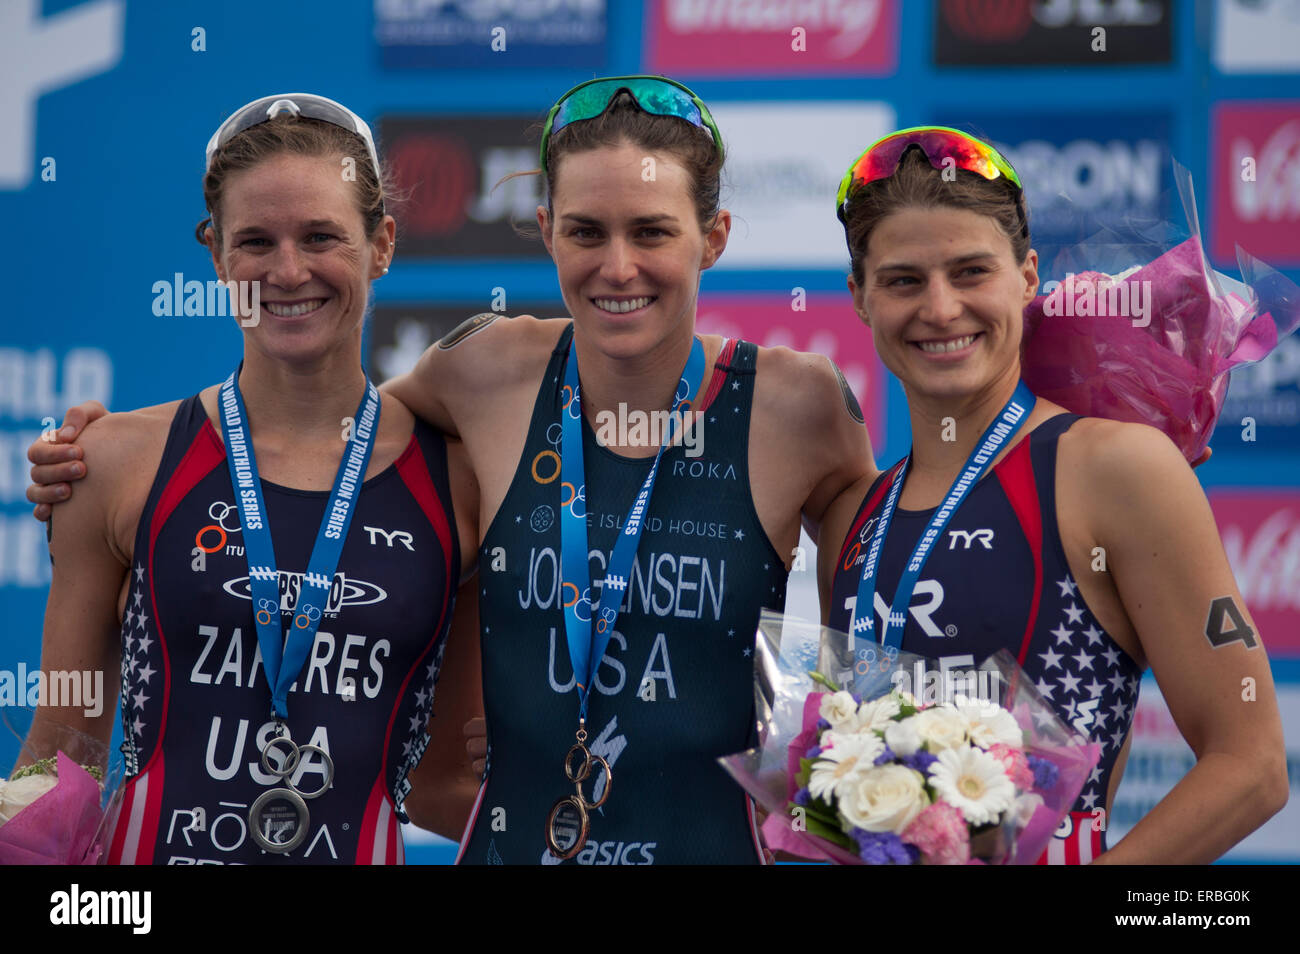 Hyde Park, London, UK. 31st May, 2015. USA women take the top three places, with Gwen Jorgensen first, Katie Zaferes second and Sarah True in Third position. Credit:  Malcolm Park editorial/Alamy Live News Stock Photo